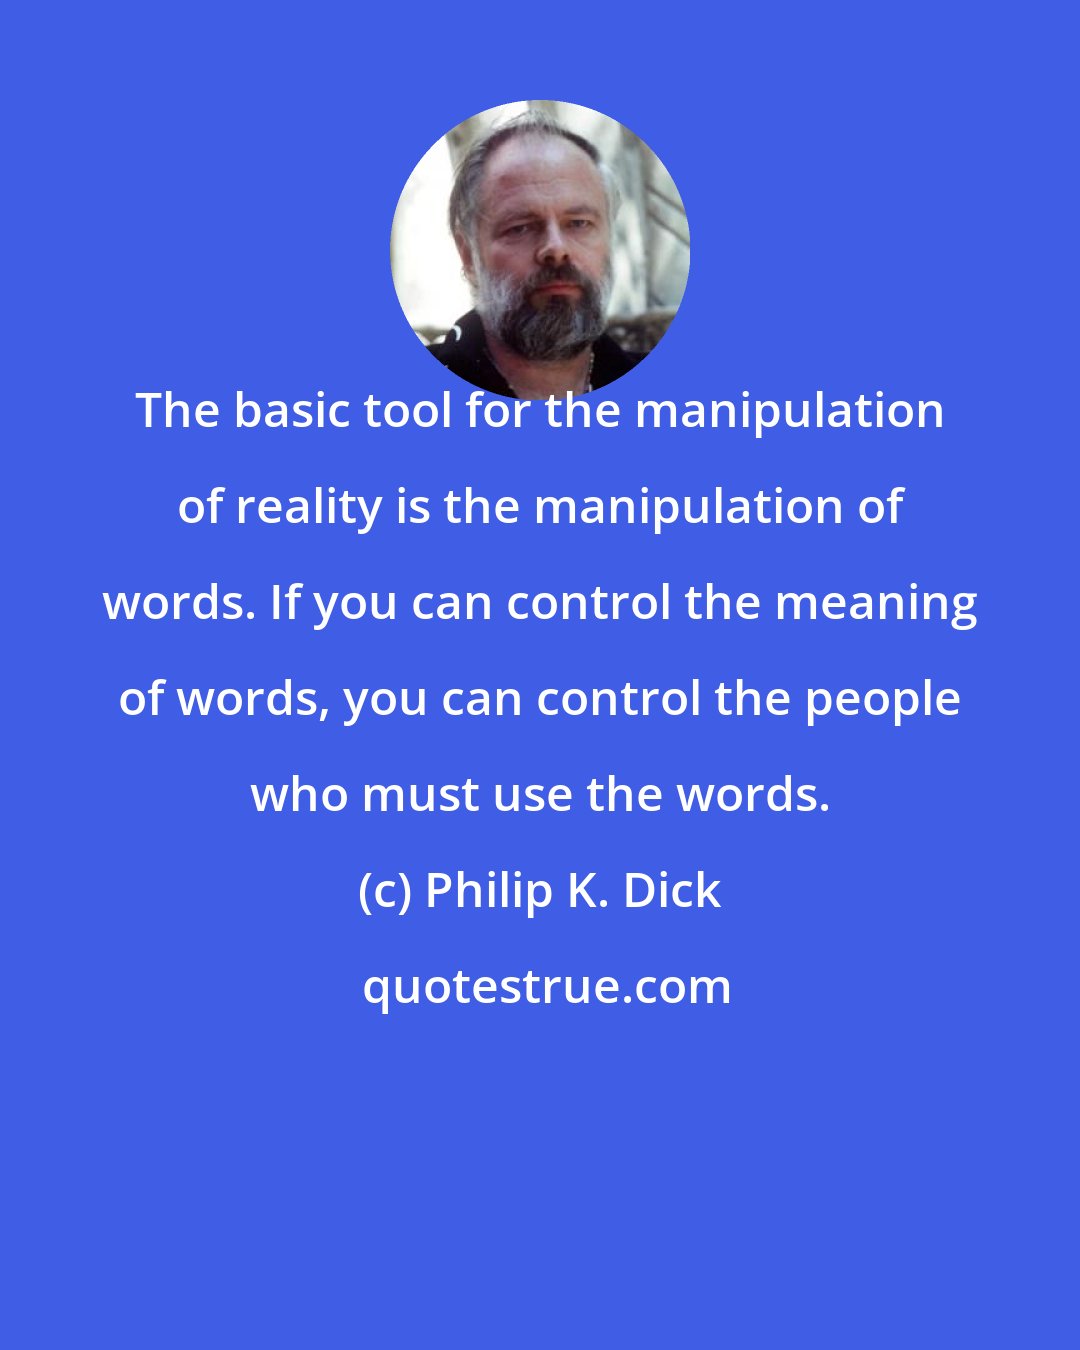 Philip K. Dick: The basic tool for the manipulation of reality is the manipulation of words. If you can control the meaning of words, you can control the people who must use the words.